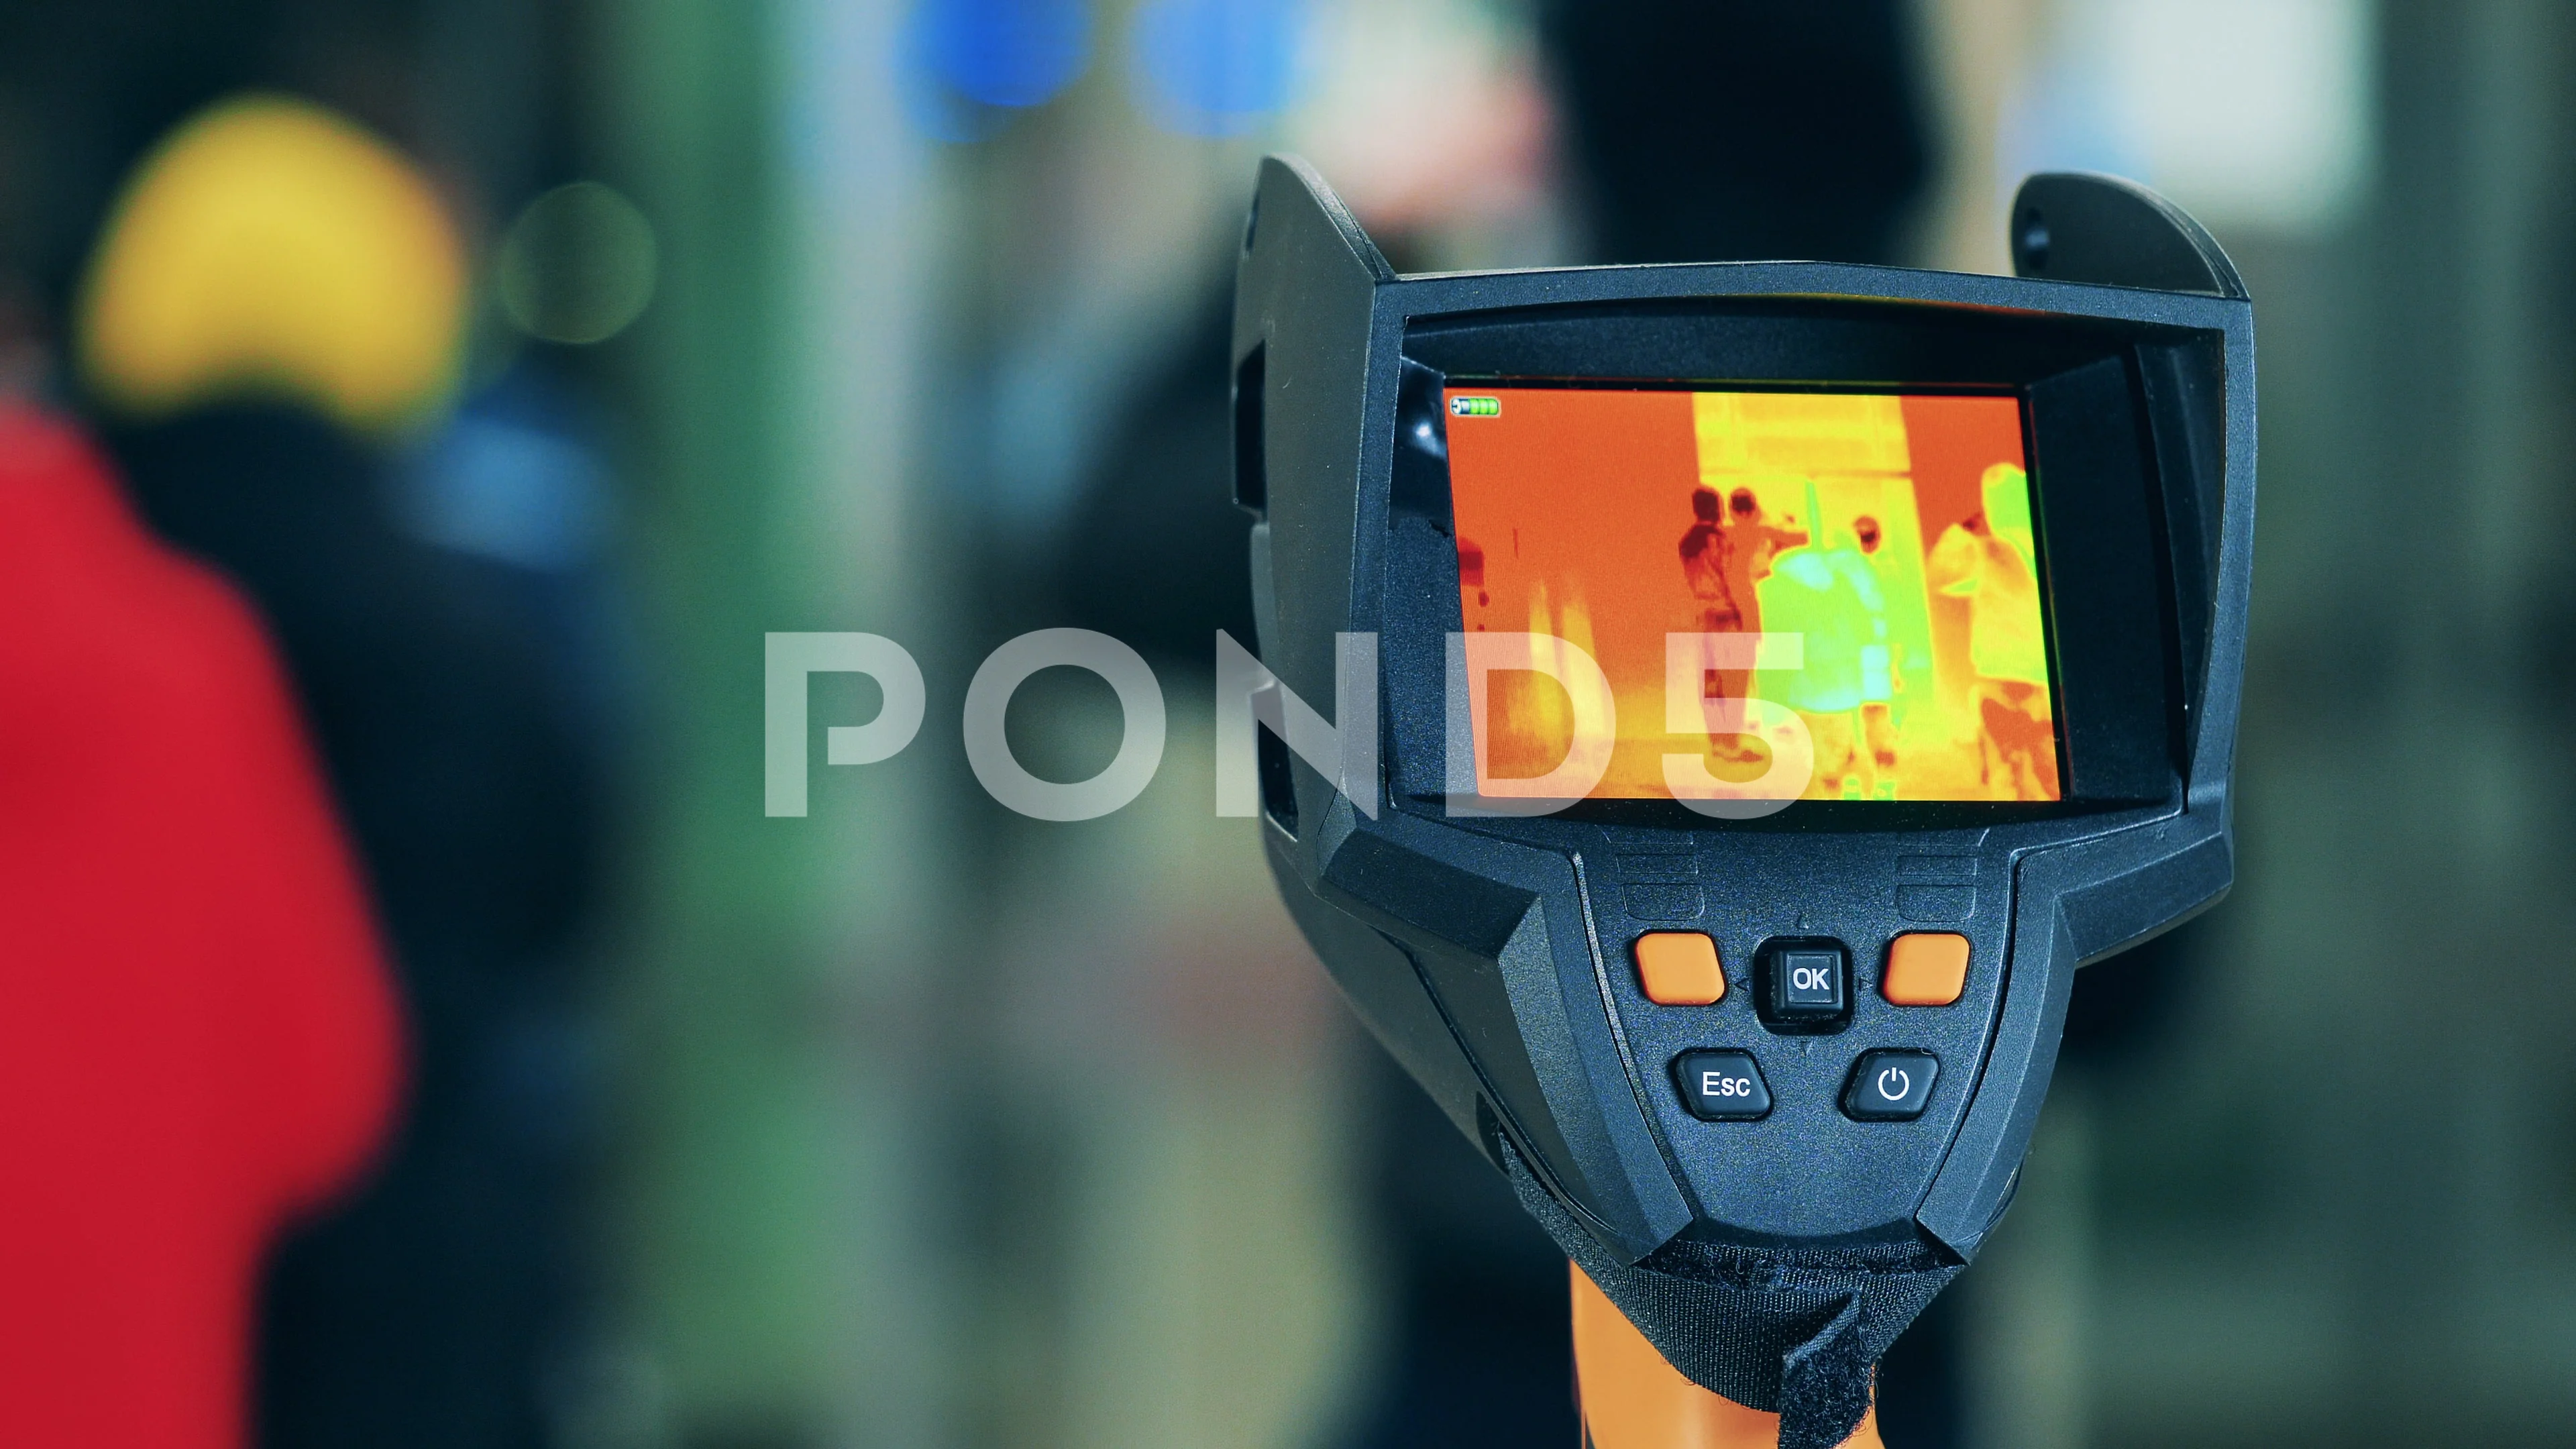 https://images.pond5.com/thermographic-camera-showing-people-through-footage-142580811_prevstill.jpeg